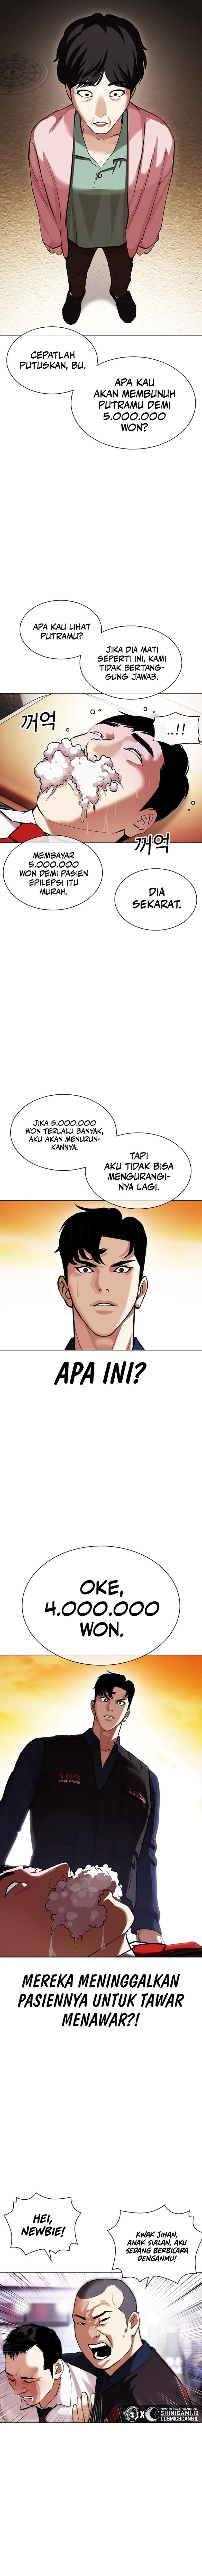 Lookism Chapter 447 Image 6